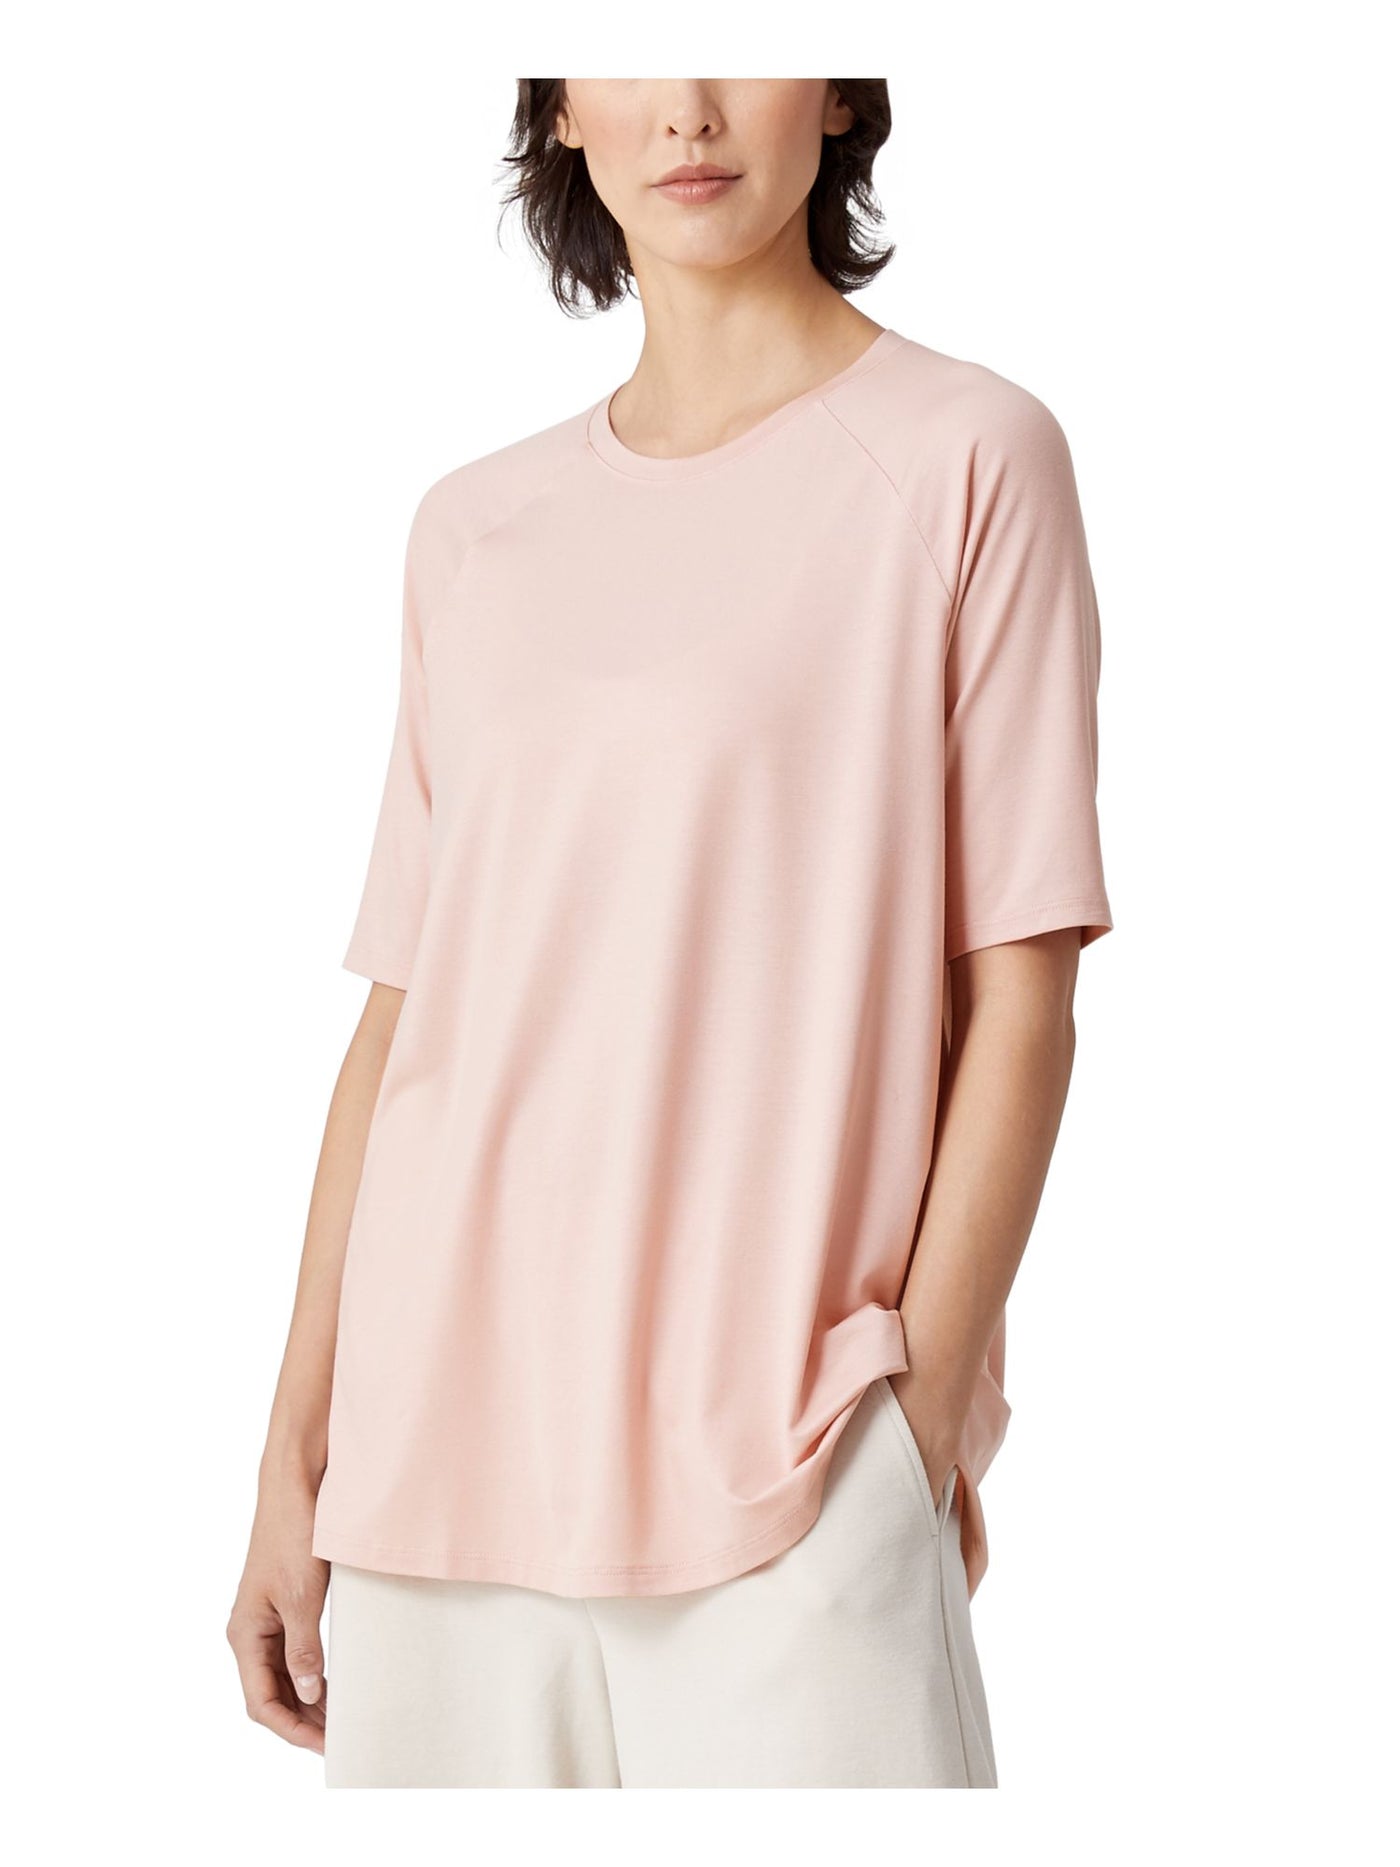 EILEEN FISHER Womens Pink Stretch Elbow Sleeve Crew Neck T-Shirt M